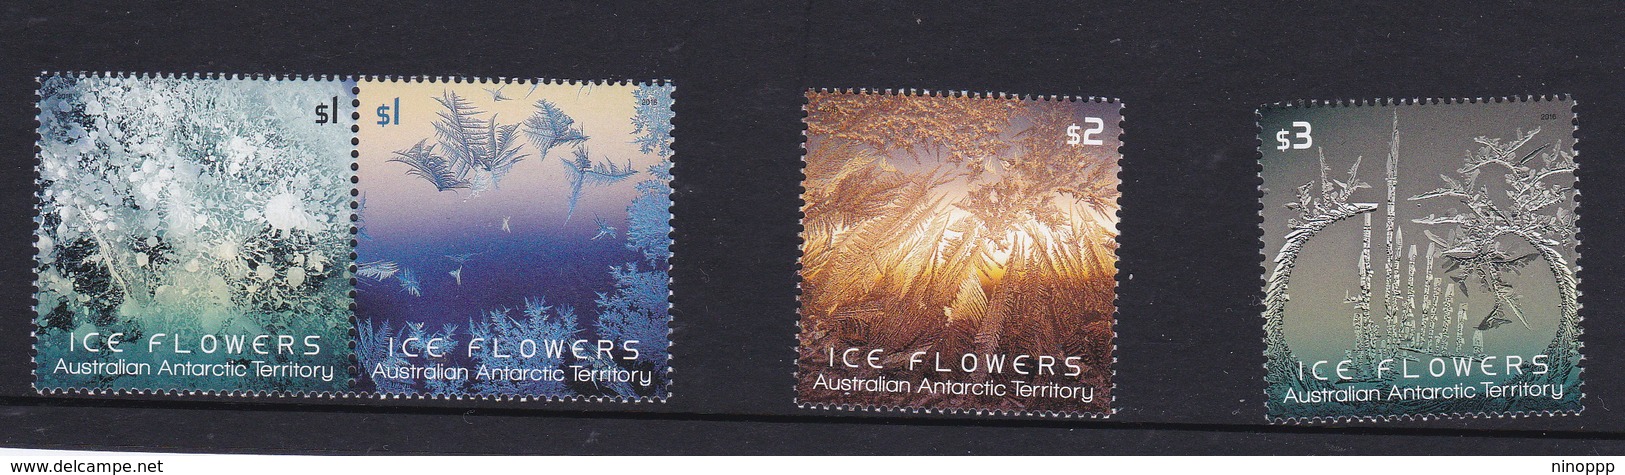 Australian Antarctic Territory  S 236-239 2016 Ice Flowers,Mint Never Hinged - Used Stamps